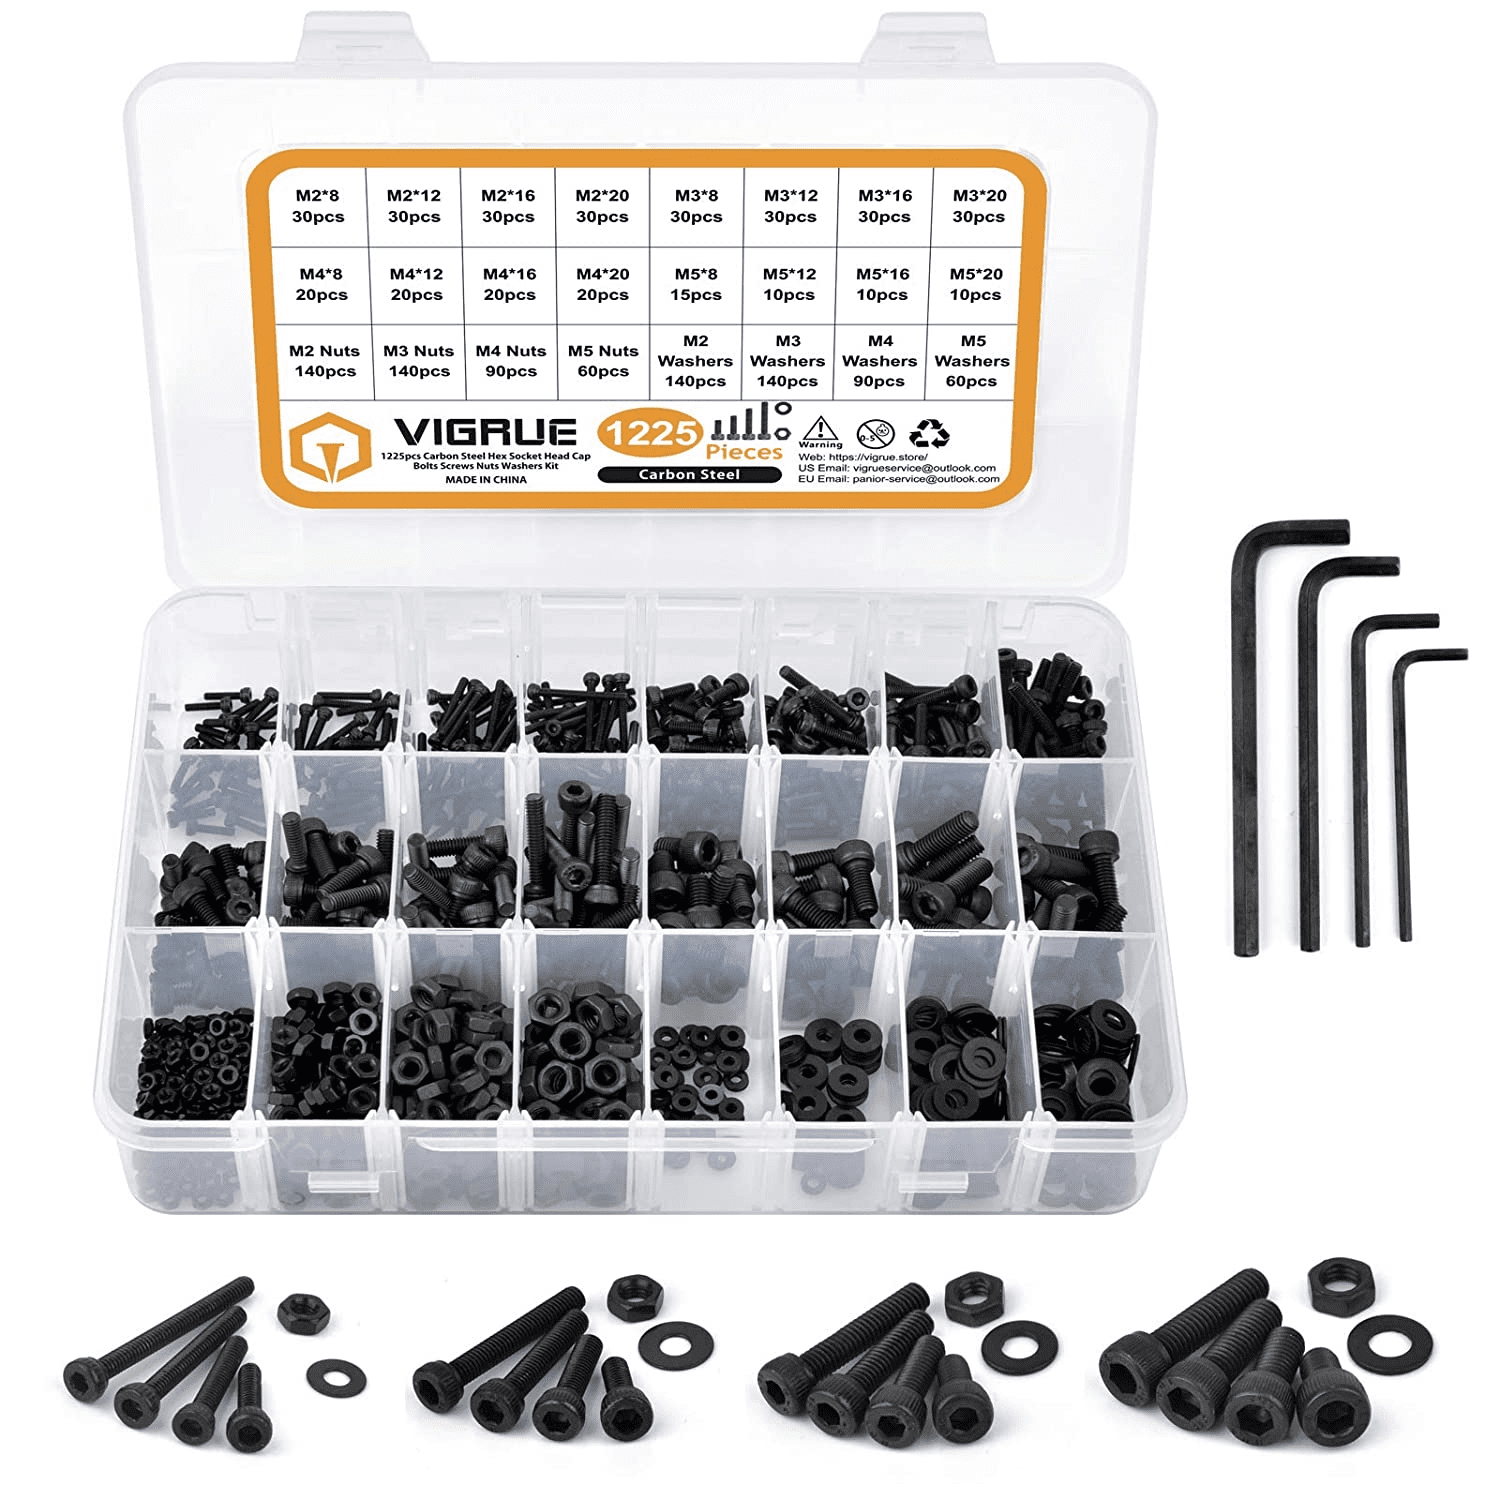 740 ASSORTED NUMBER PLATE 1" SCREWS M6 PLASTIC BOLTS COVER CAPS & M6 NUTS KIT 